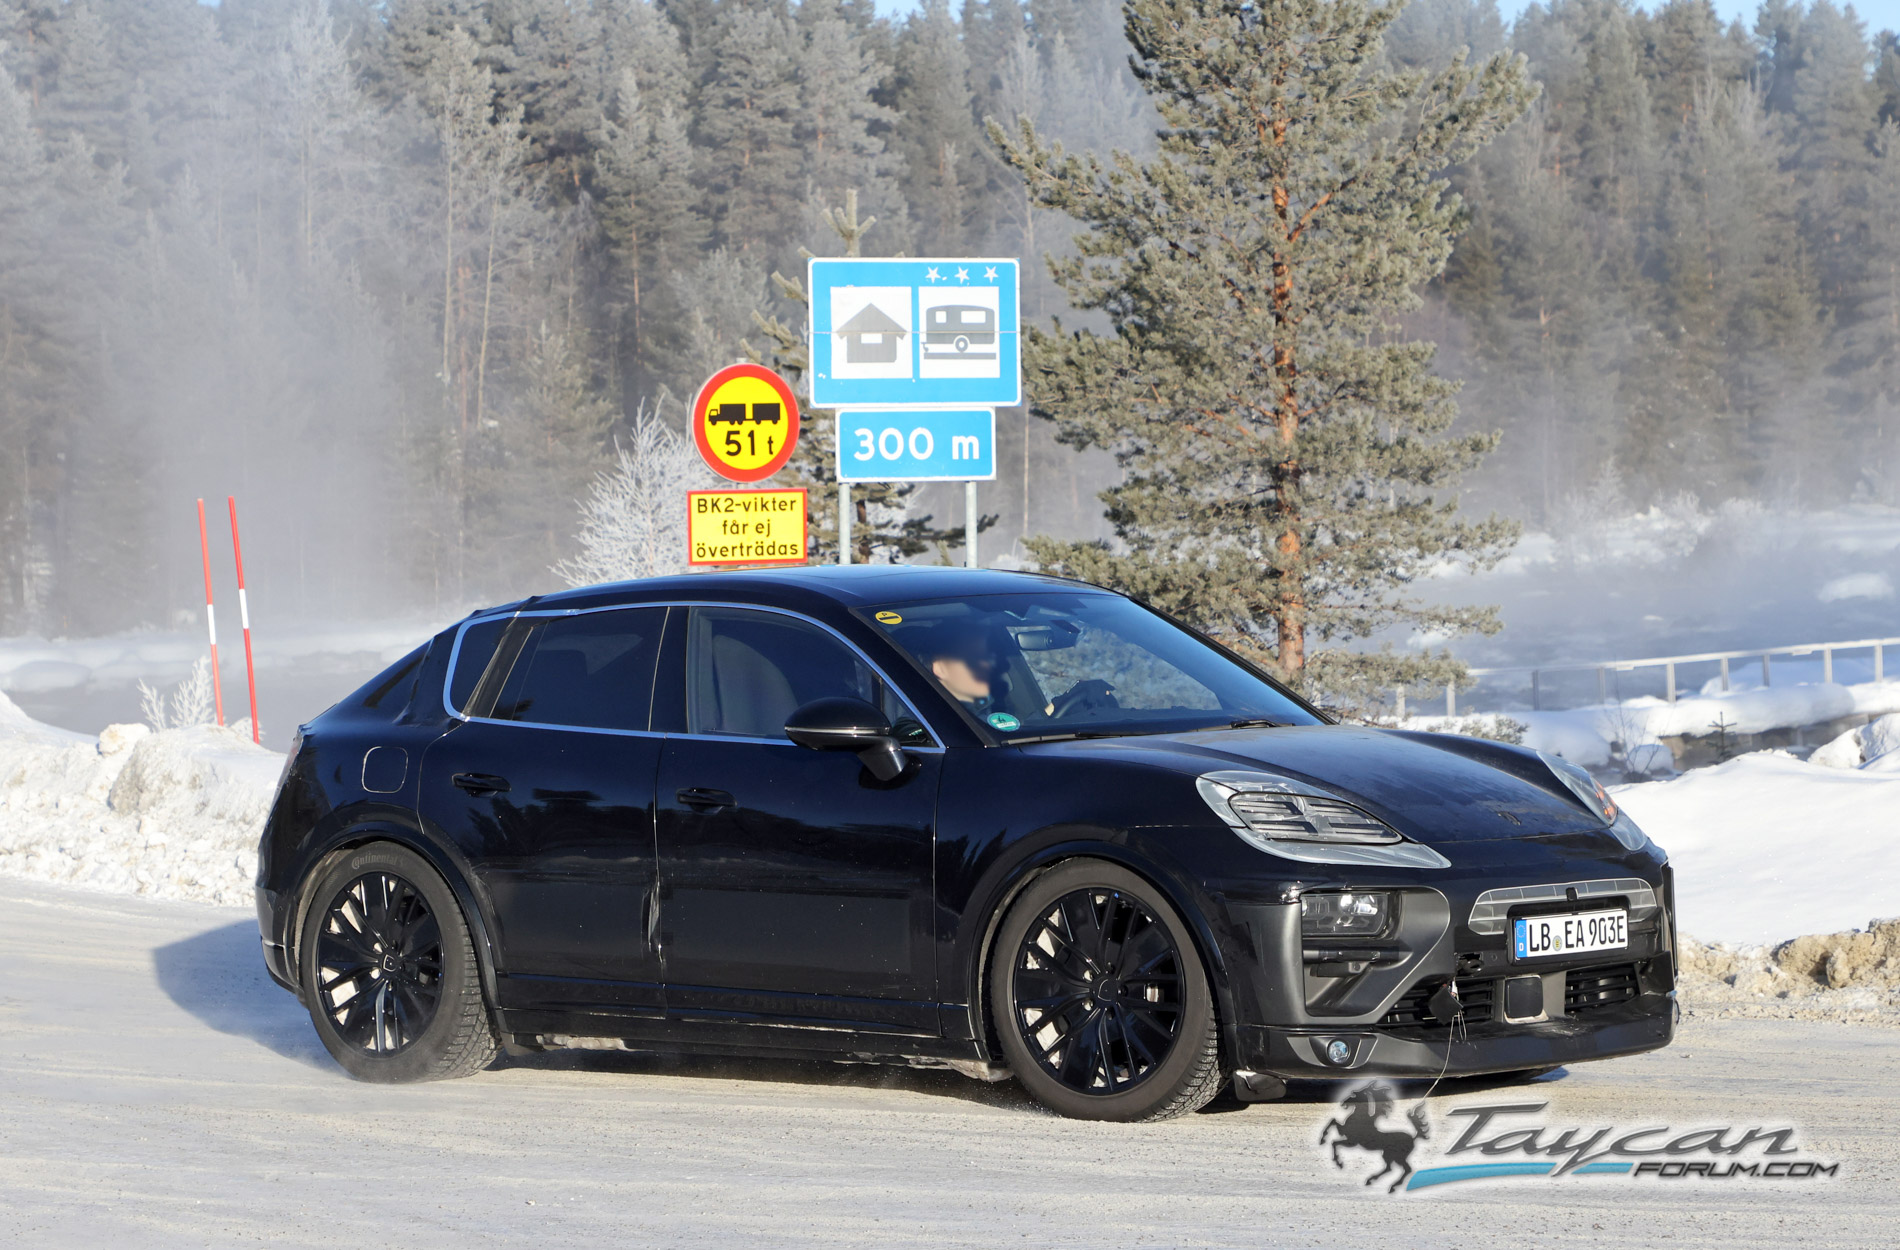 Macan EV Macan EV Interior Spied Uncovered! + Latest Cold Climate Testing Photos Porsche Macan 12